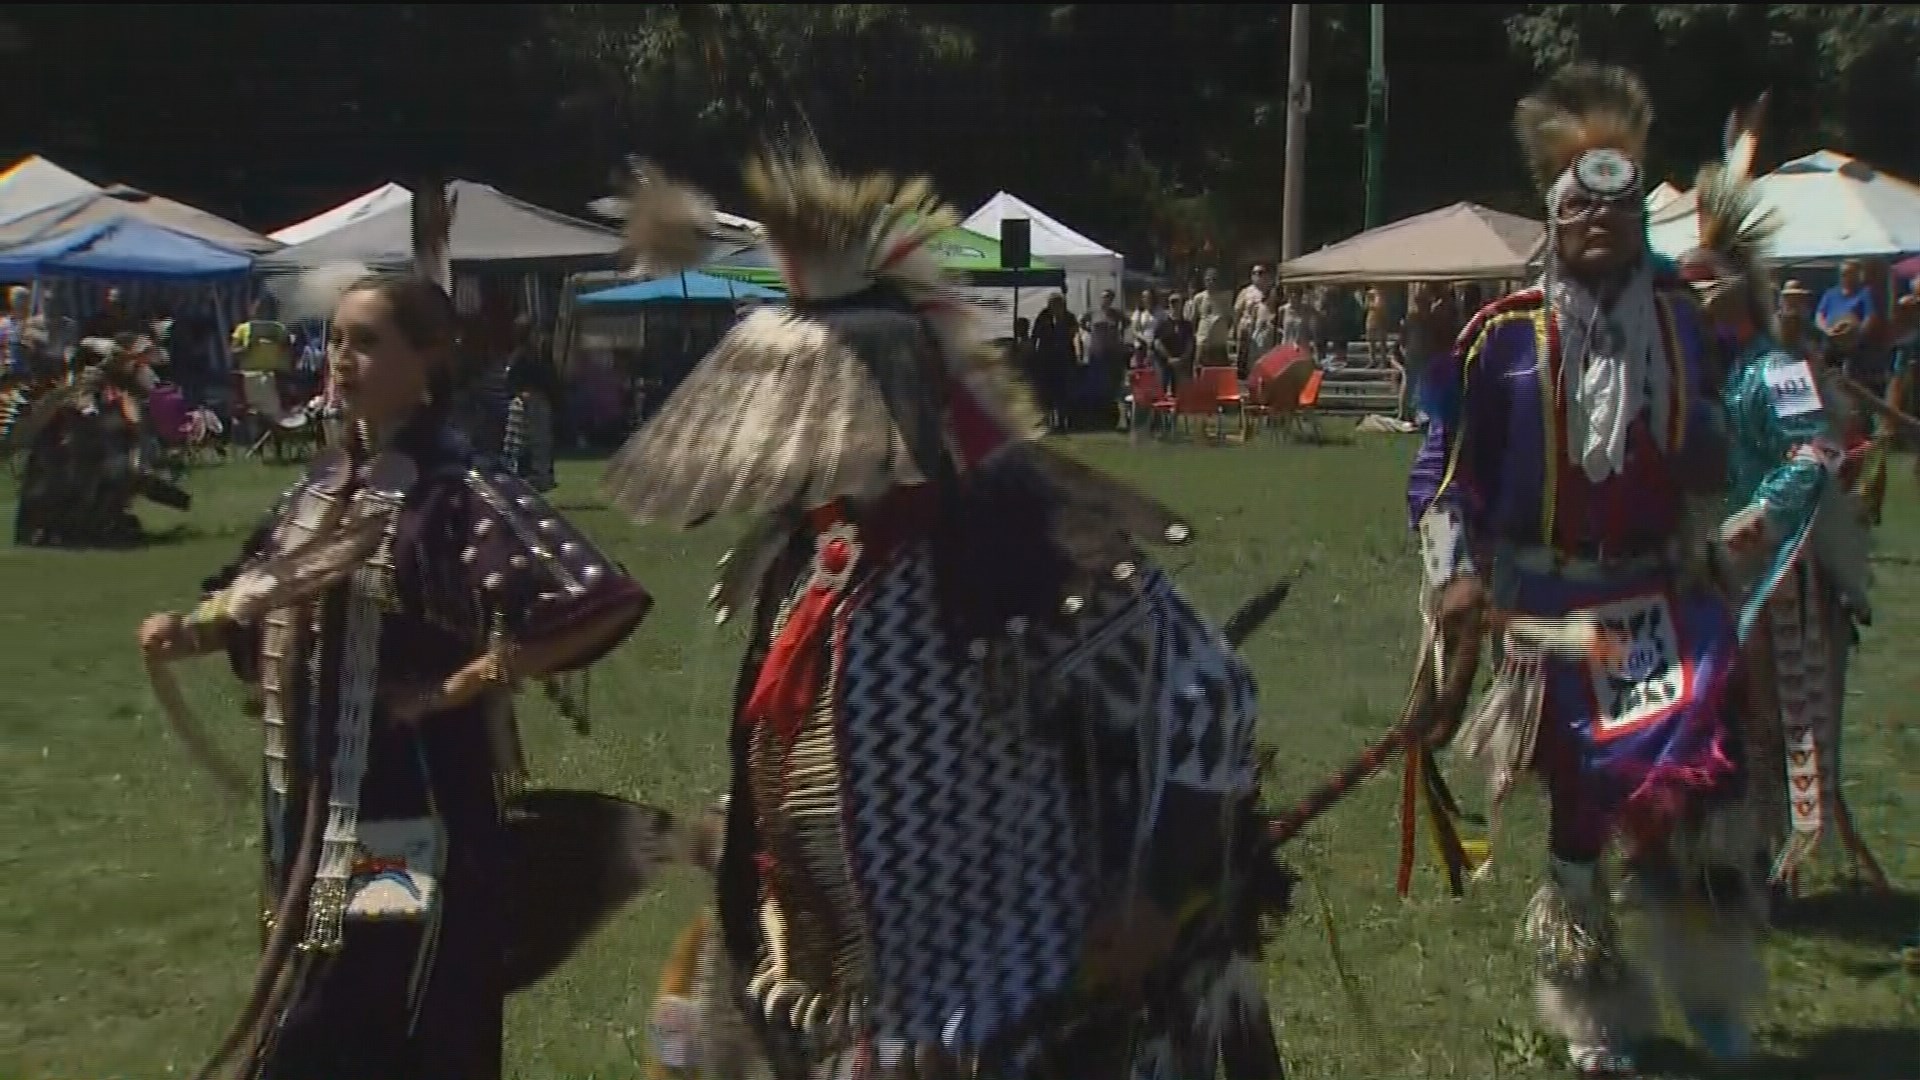 Seafair pow wow in Discovery Park in Seattle